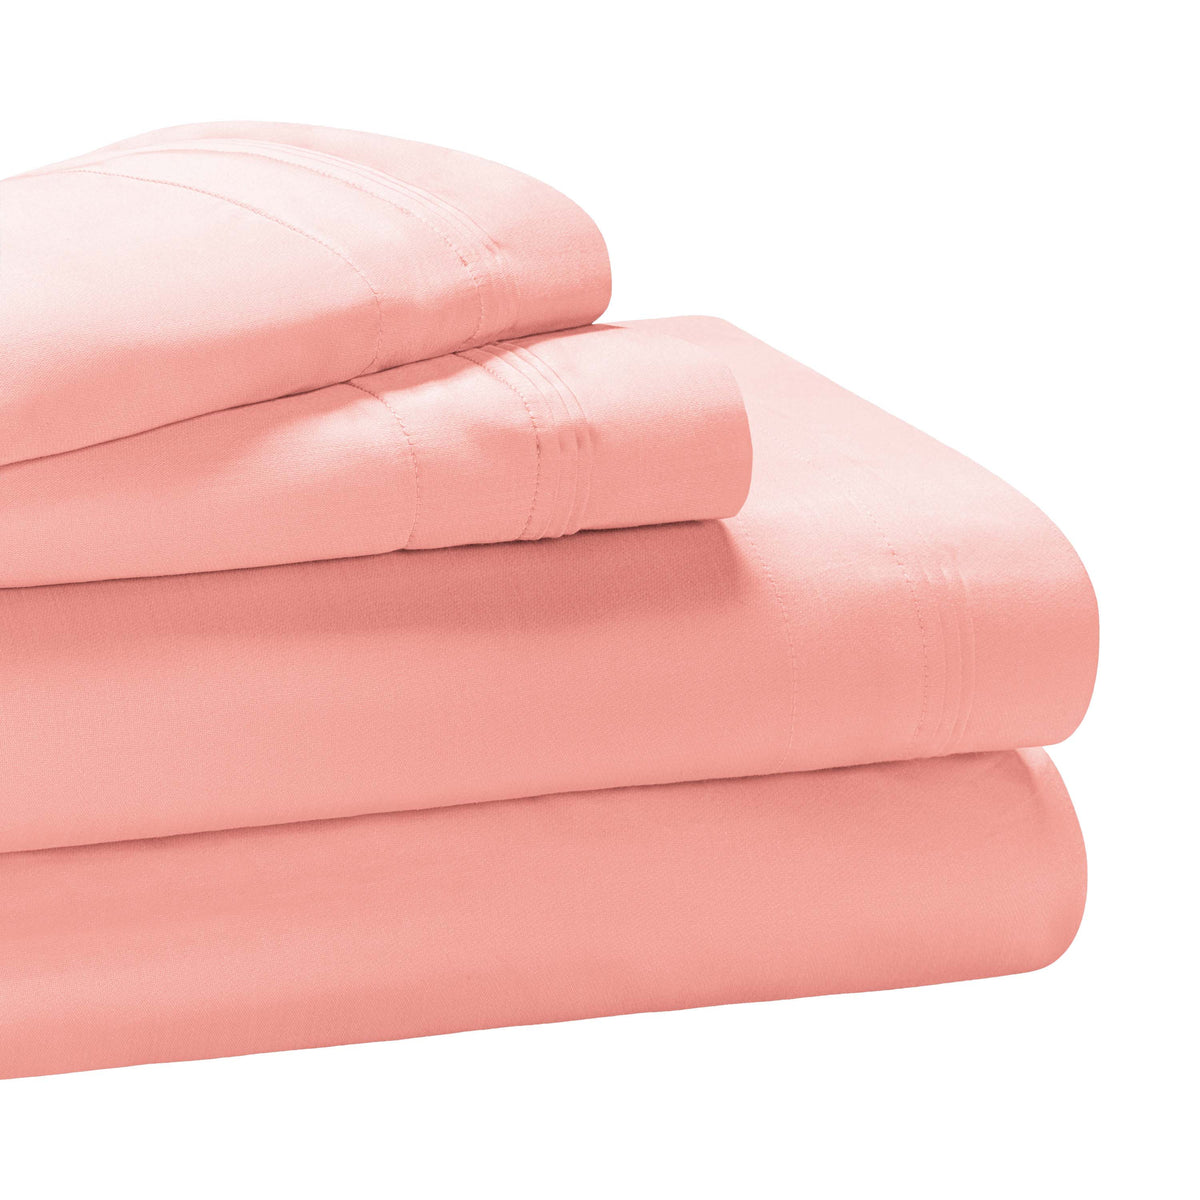 Egyptian Cotton 1000 Thread Count Eco-Friendly Solid Sheet Set - DusterRose